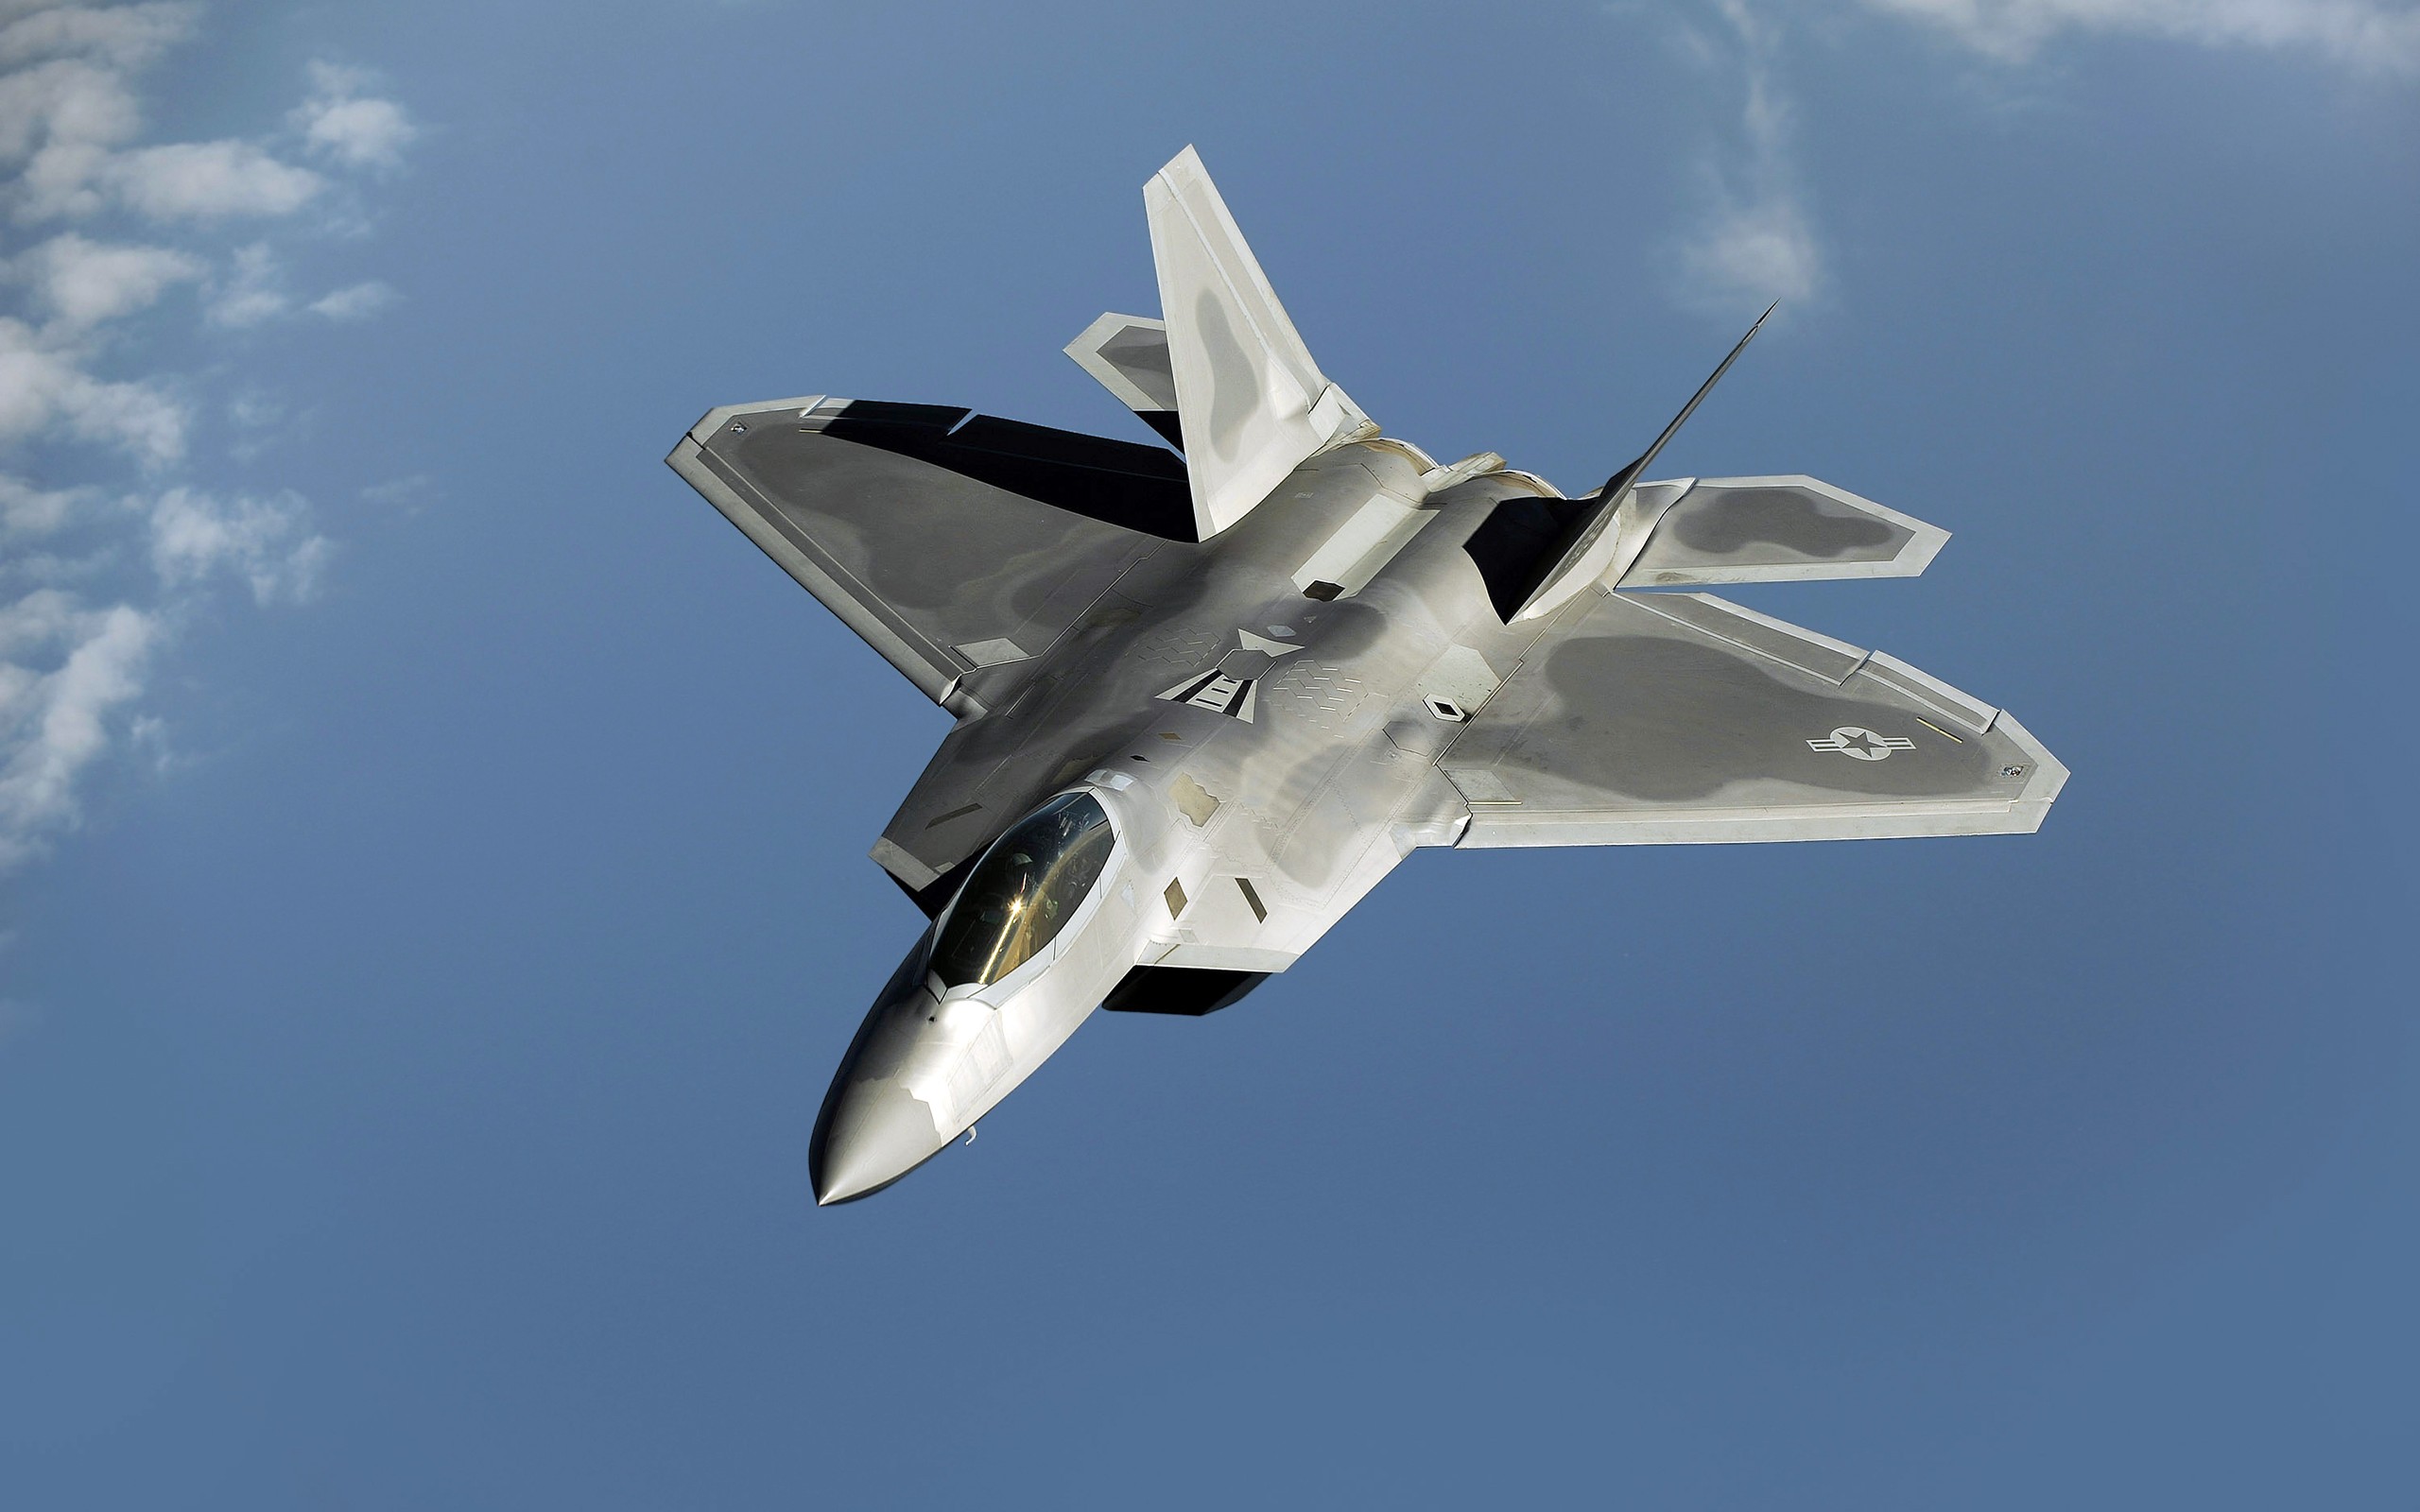 General 2560x1600 F-22 Raptor aircraft jet fighter US Air Force military military vehicle Lockheed Lockheed Martin American aircraft vehicle sky military aircraft